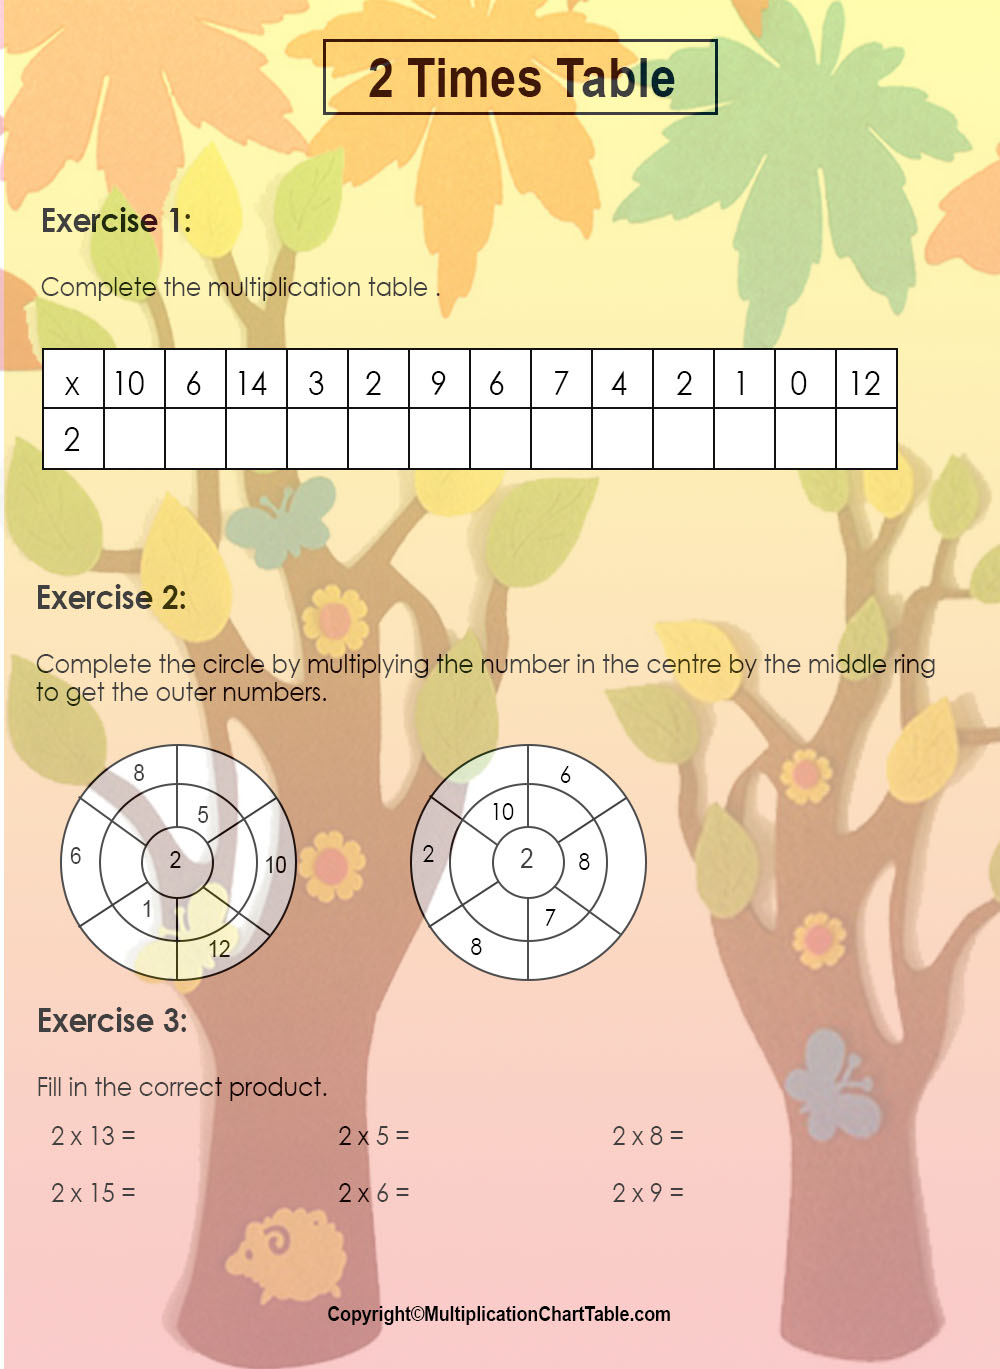 2 times table worksheets